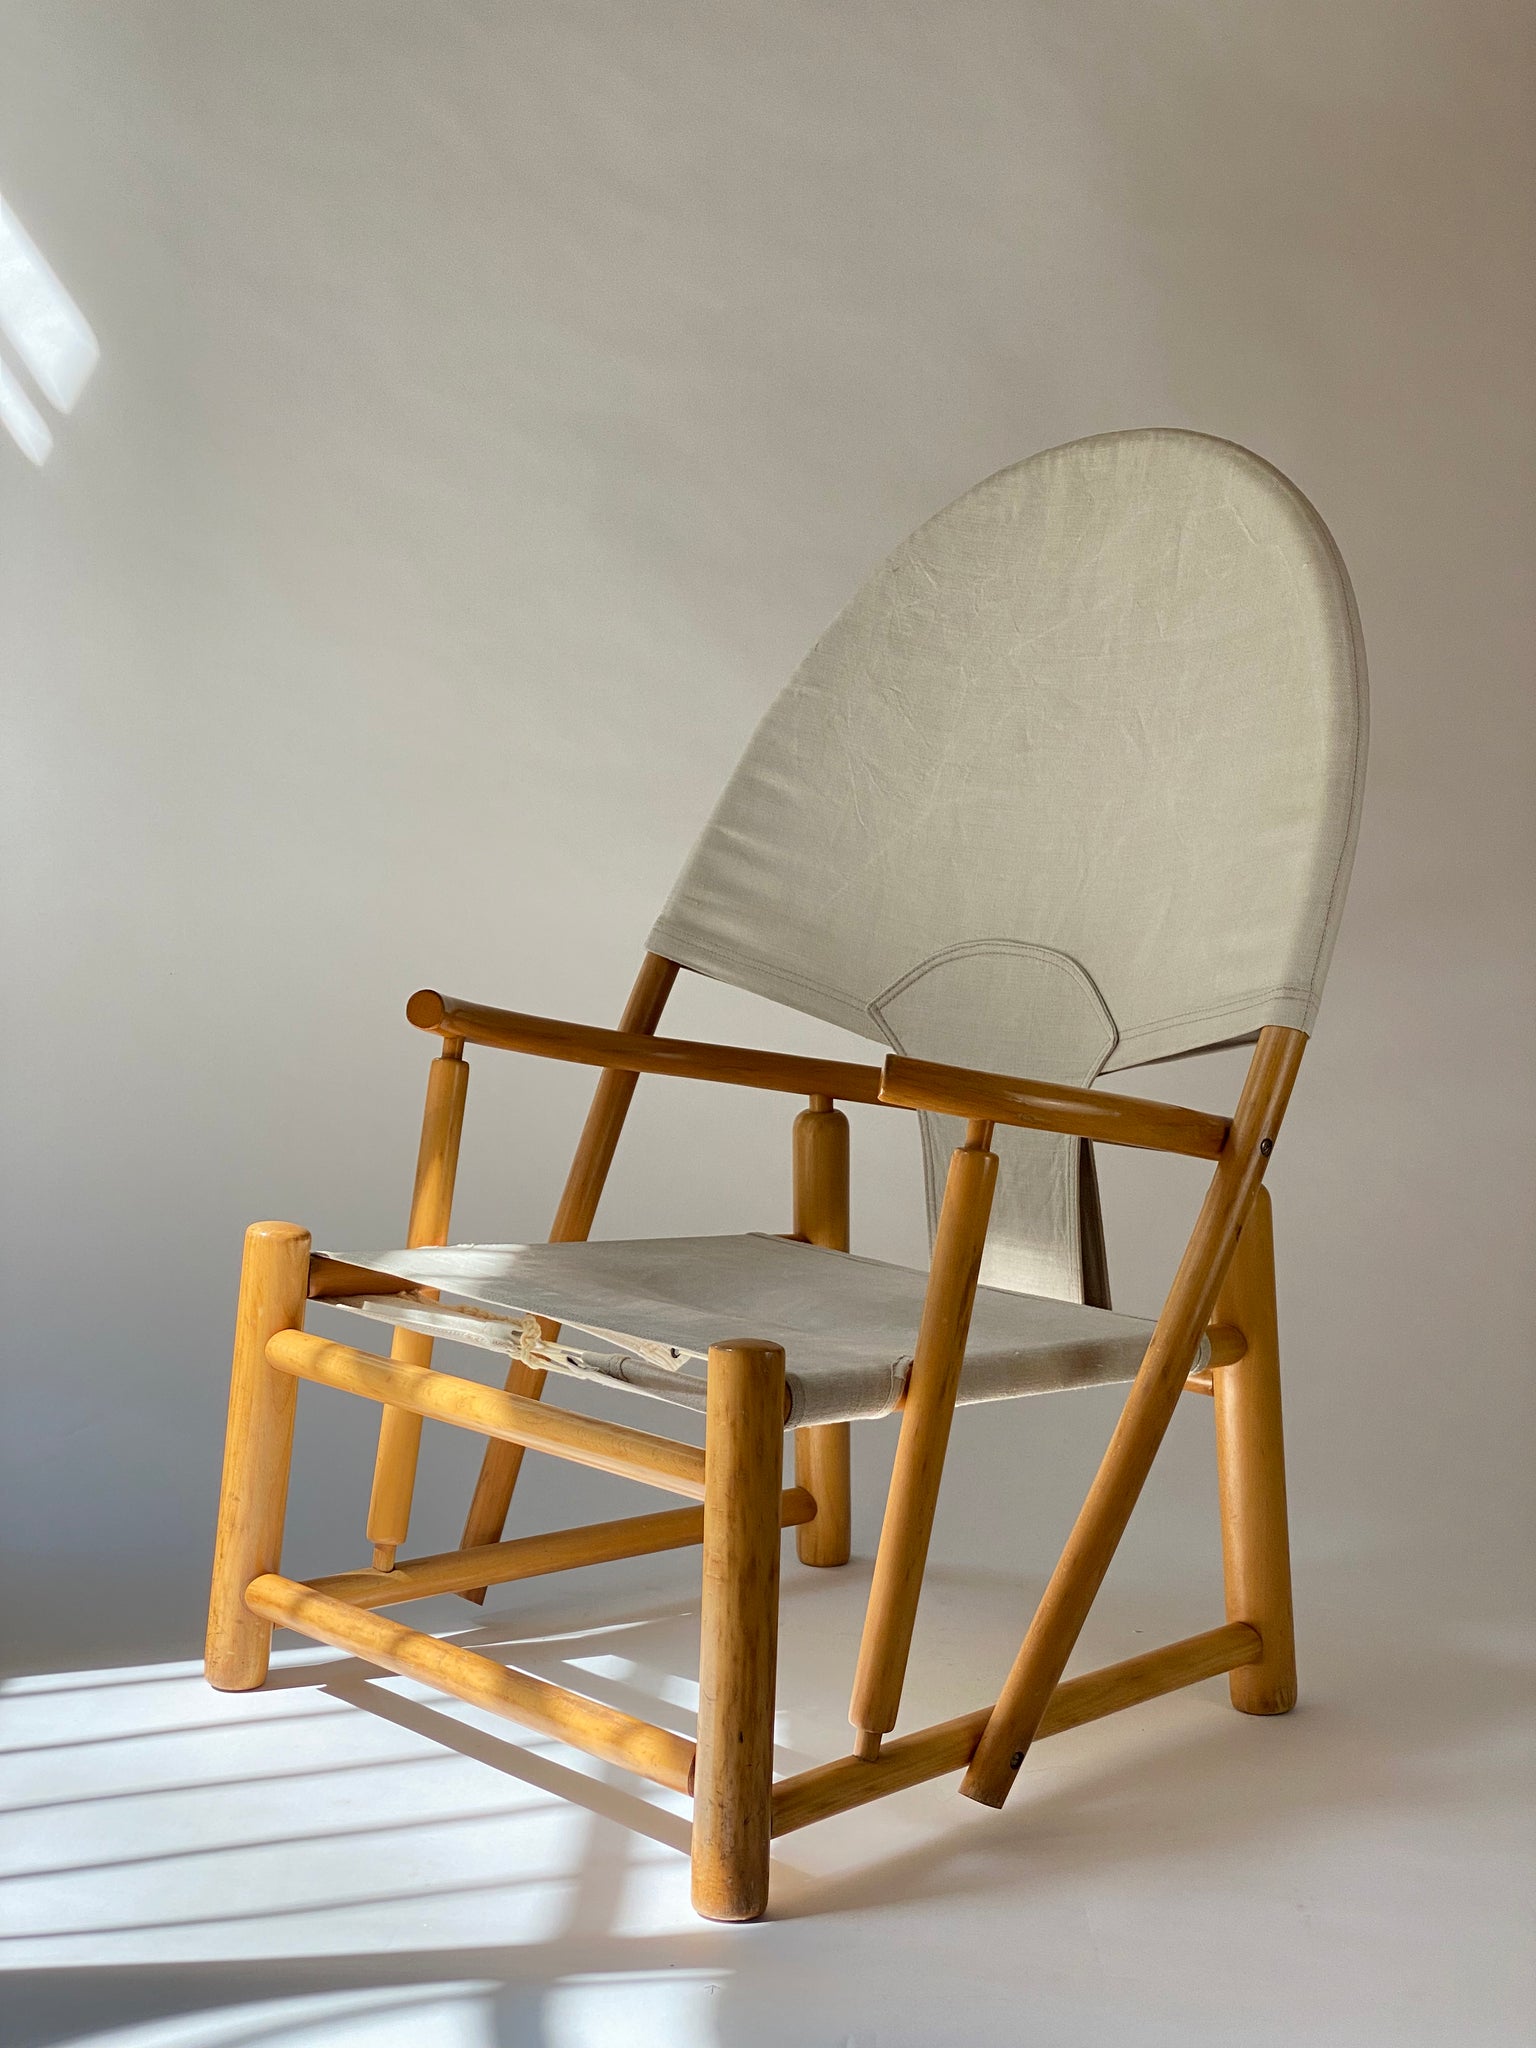 G23 Hoop Lounge Chair ANOTHER Piero – JUNE Toffoloni & Germa, Werther by for Palange